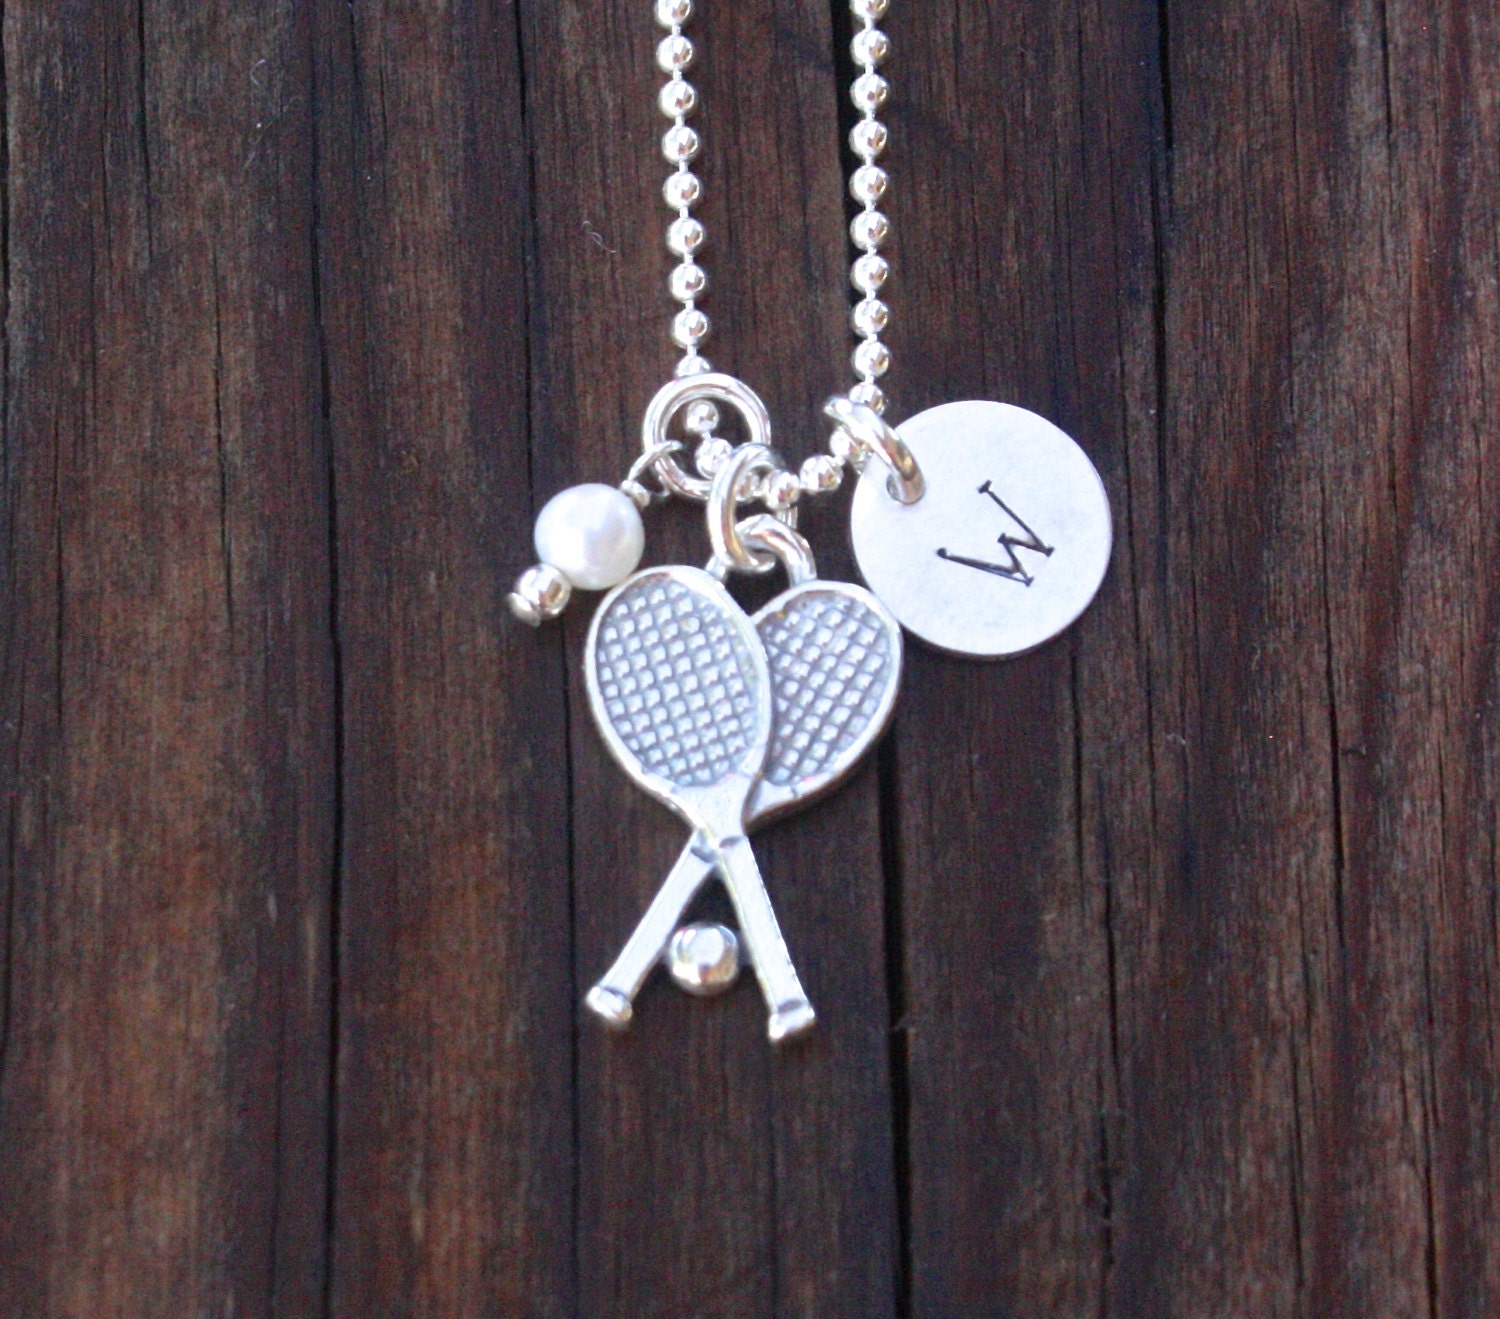 Tennis Necklace Tennis Jewelry Sterling Silver Tennis